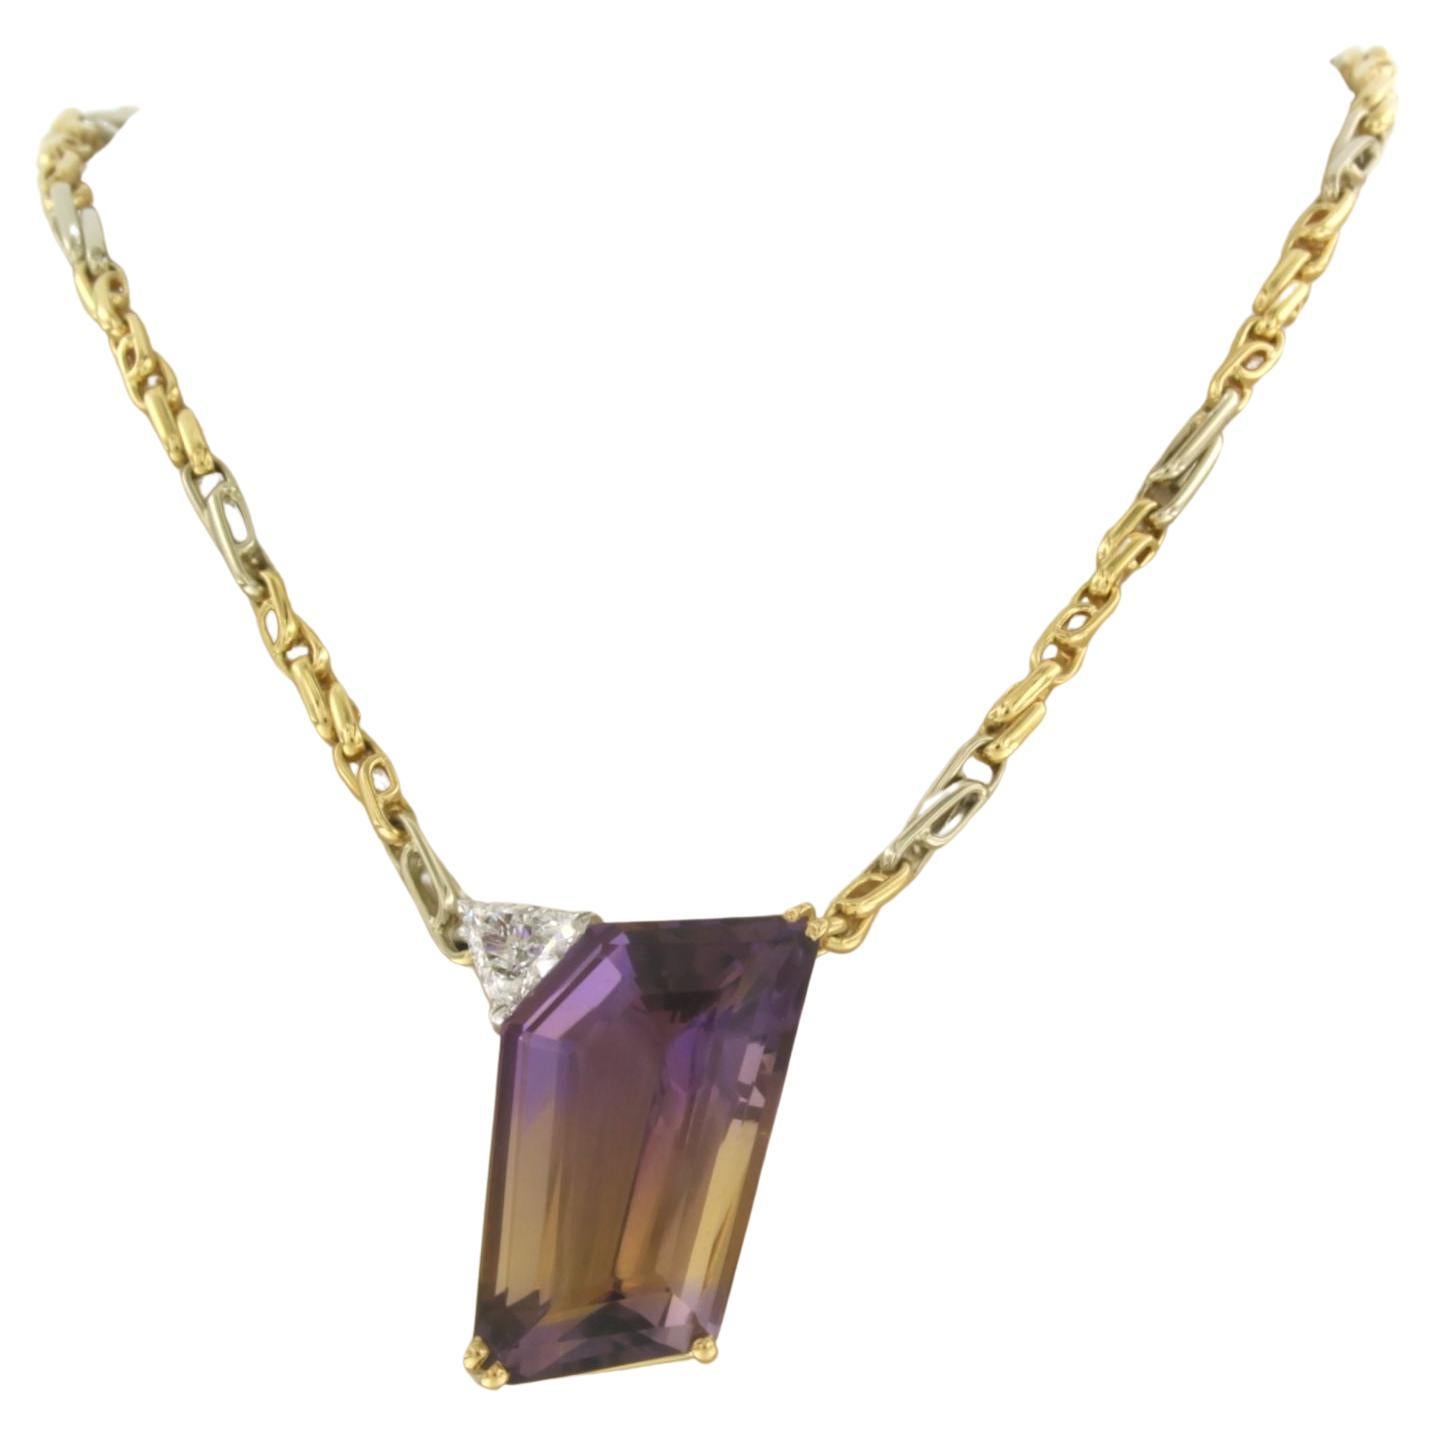 18k bicolour gold necklace with a center piece set with an ametrine and triangle cut diamond. 0.70ct – F/G – VS/SI – 50 cm long

Detailed description

the length of the necklace is 50 cm long by 3.0 mm wide

The size of the center piece is 2.4 cm